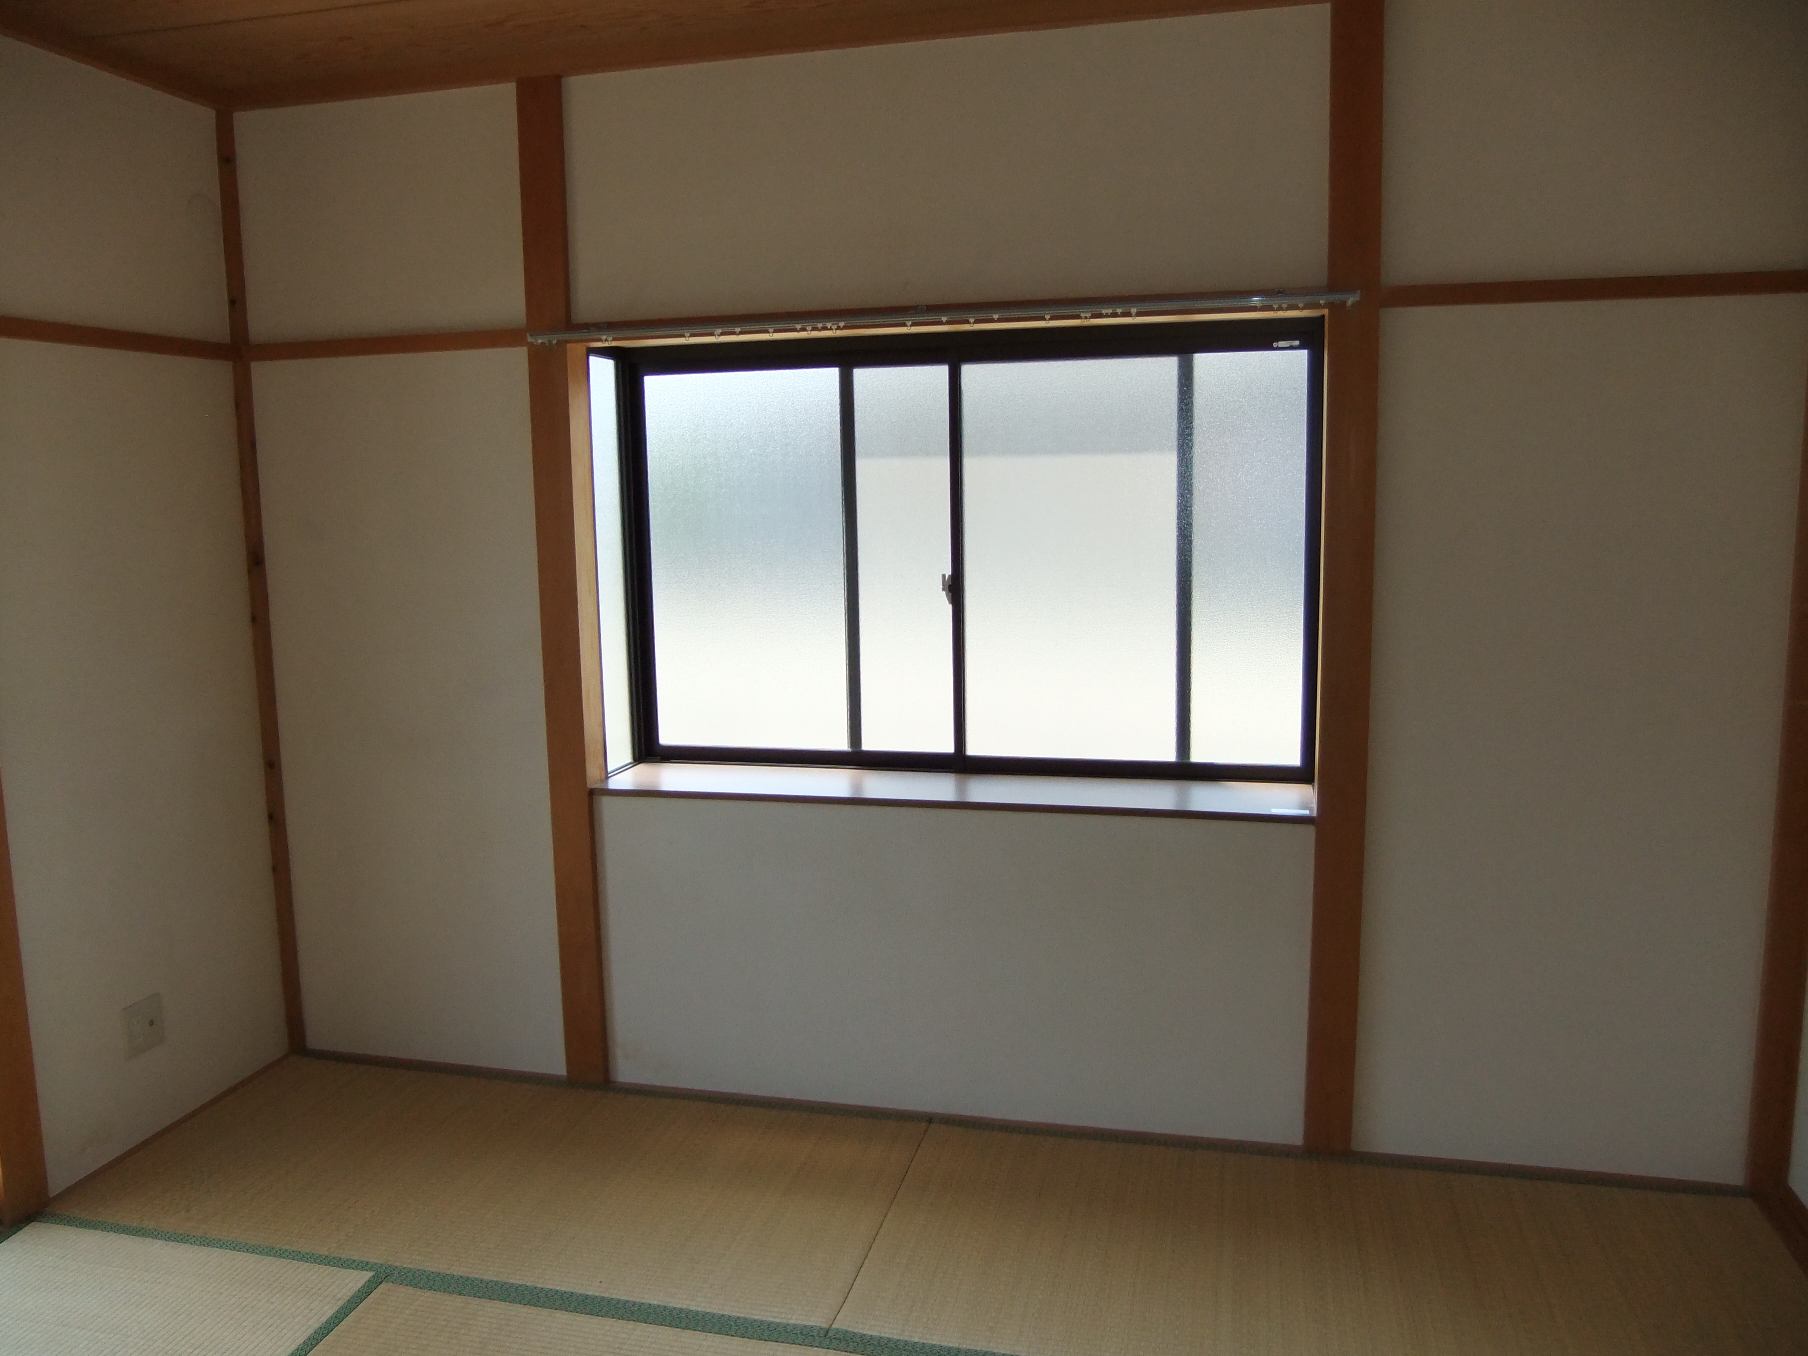 Other room space. Since it is a corner room comes with a bay window on the west side.